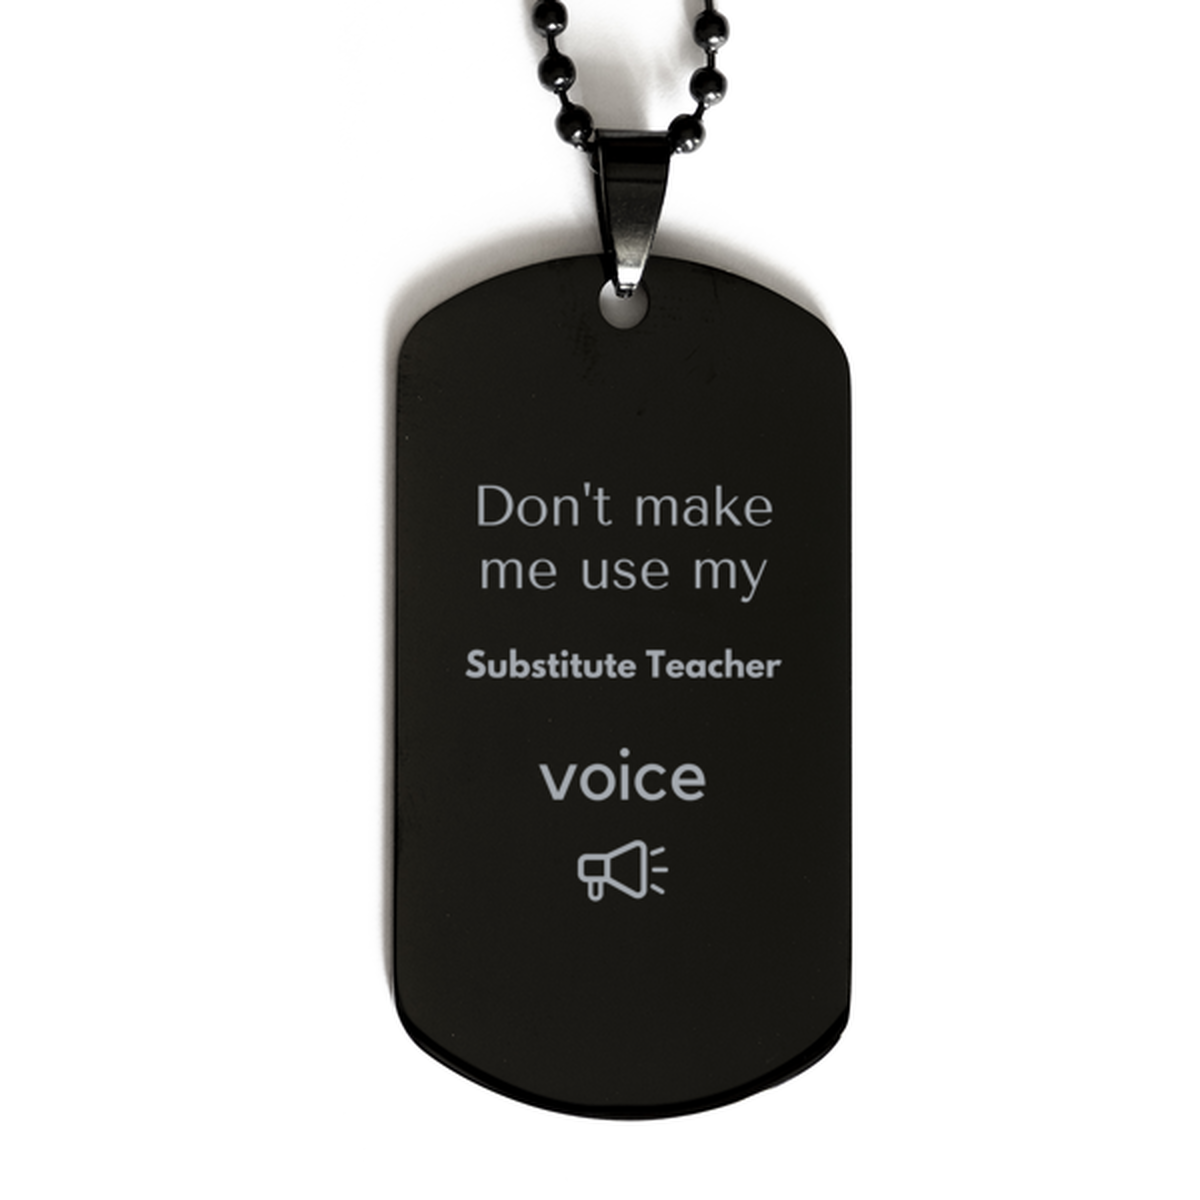 Don't make me use my Substitute Teacher voice, Sarcasm Substitute Teacher Gifts, Christmas Substitute Teacher Black Dog Tag Birthday Unique Gifts For Substitute Teacher Coworkers, Men, Women, Colleague, Friends